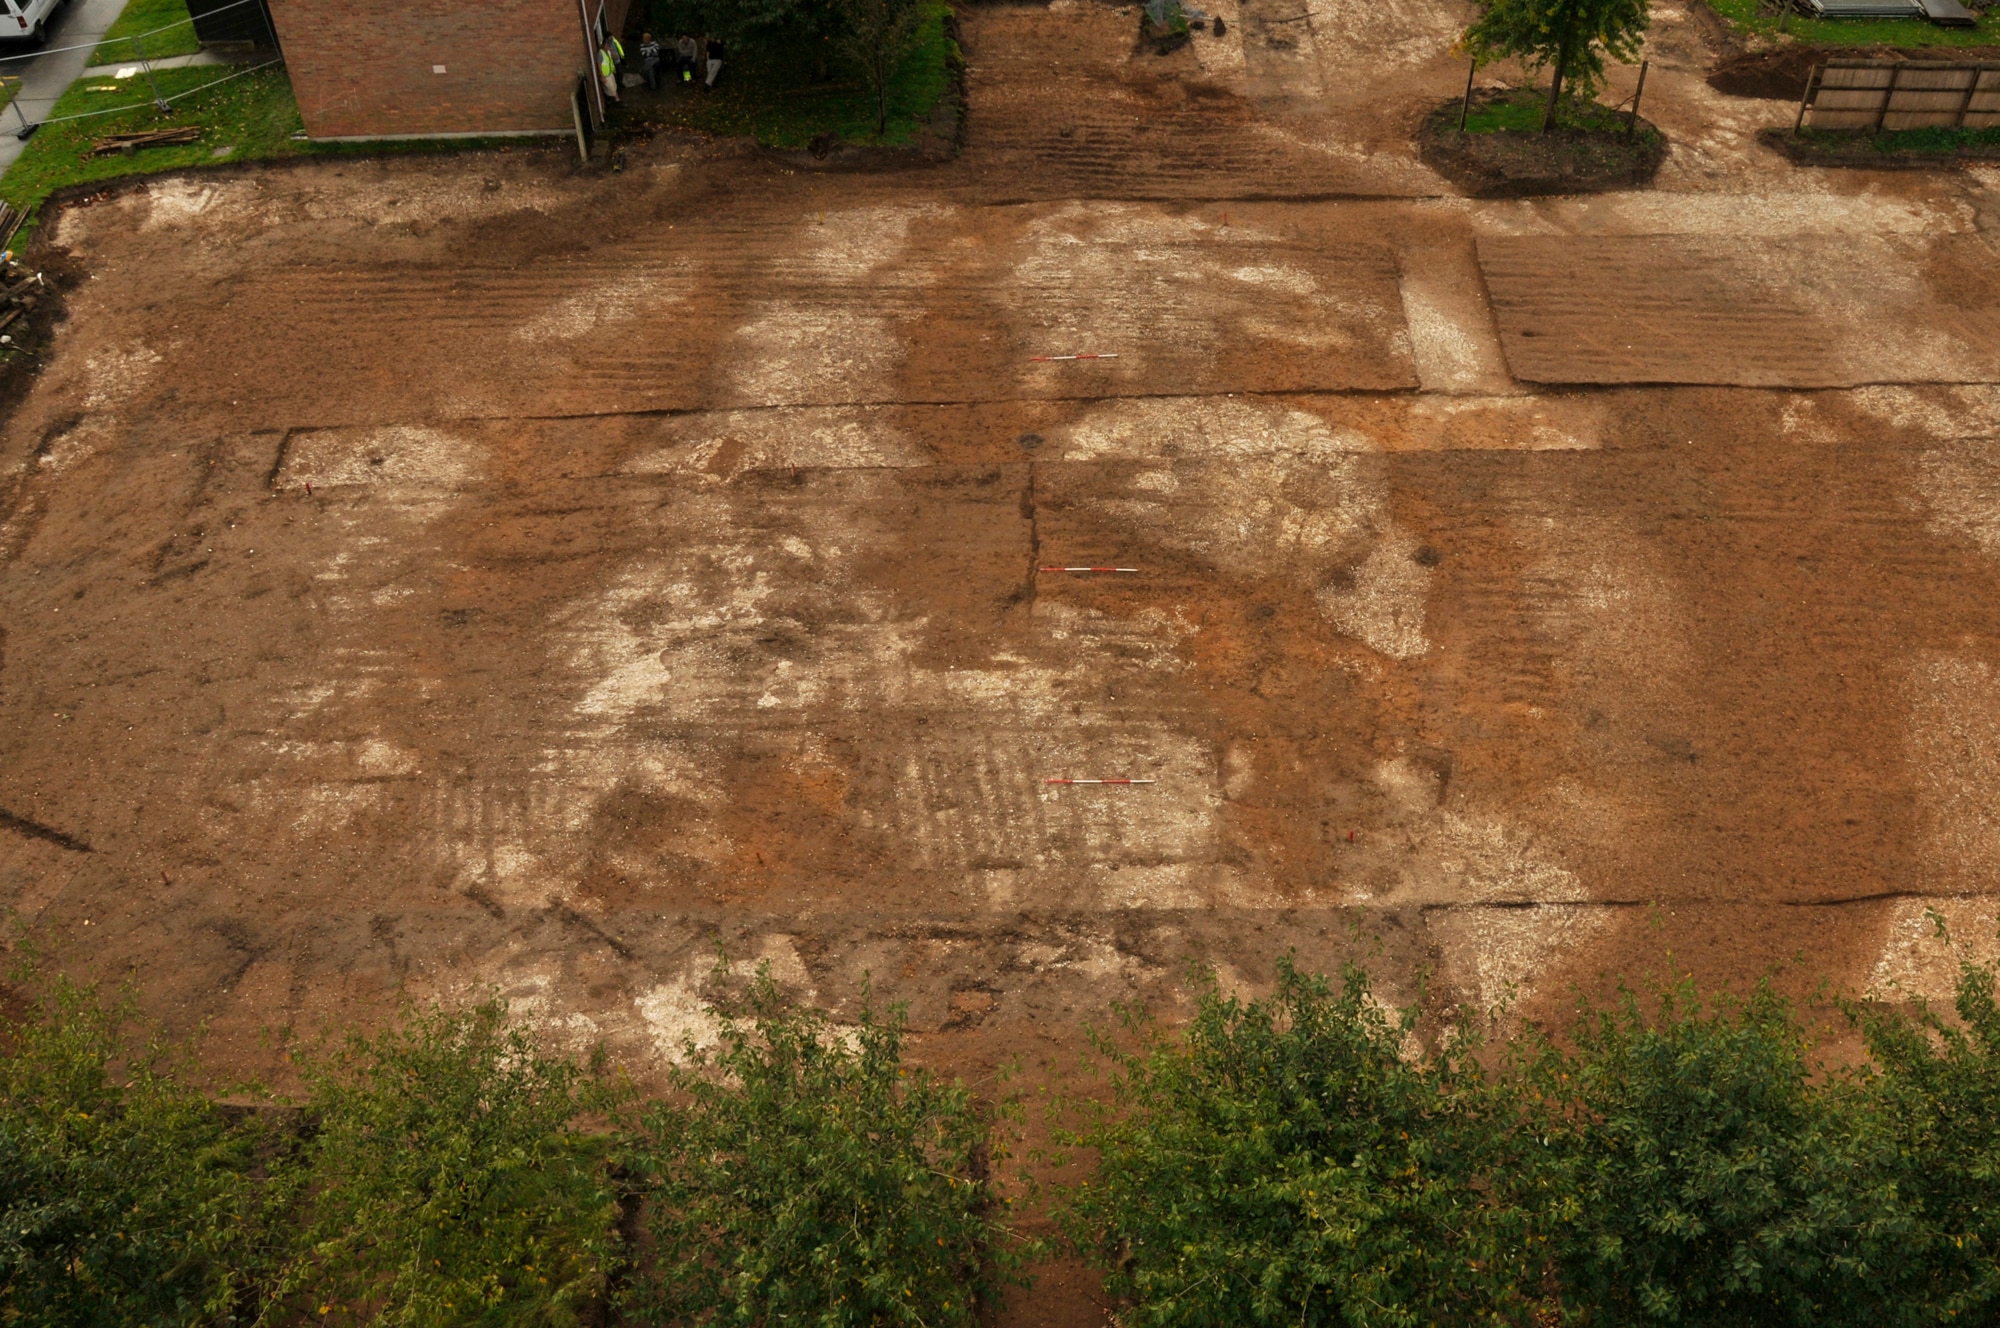 When a housing unit at RAF Lakenheath, England, was torn down, construction workers found signs of an ancient ?ring ditch burial mound,? the outline of the mound can be seen through the darker areas in the picture. When construction workers saw this, they contacted the 48th Civil Engineering Environmental flight, who then coordinated the archaeological dig with the Suffolk County Council Archaeological Service. Five human skeletons dating back to periods between the Bronze and Iron age were found in the ditch surrounding the mound. (U.S. Air Force photo by Airman 1st Class Perry Aston) 